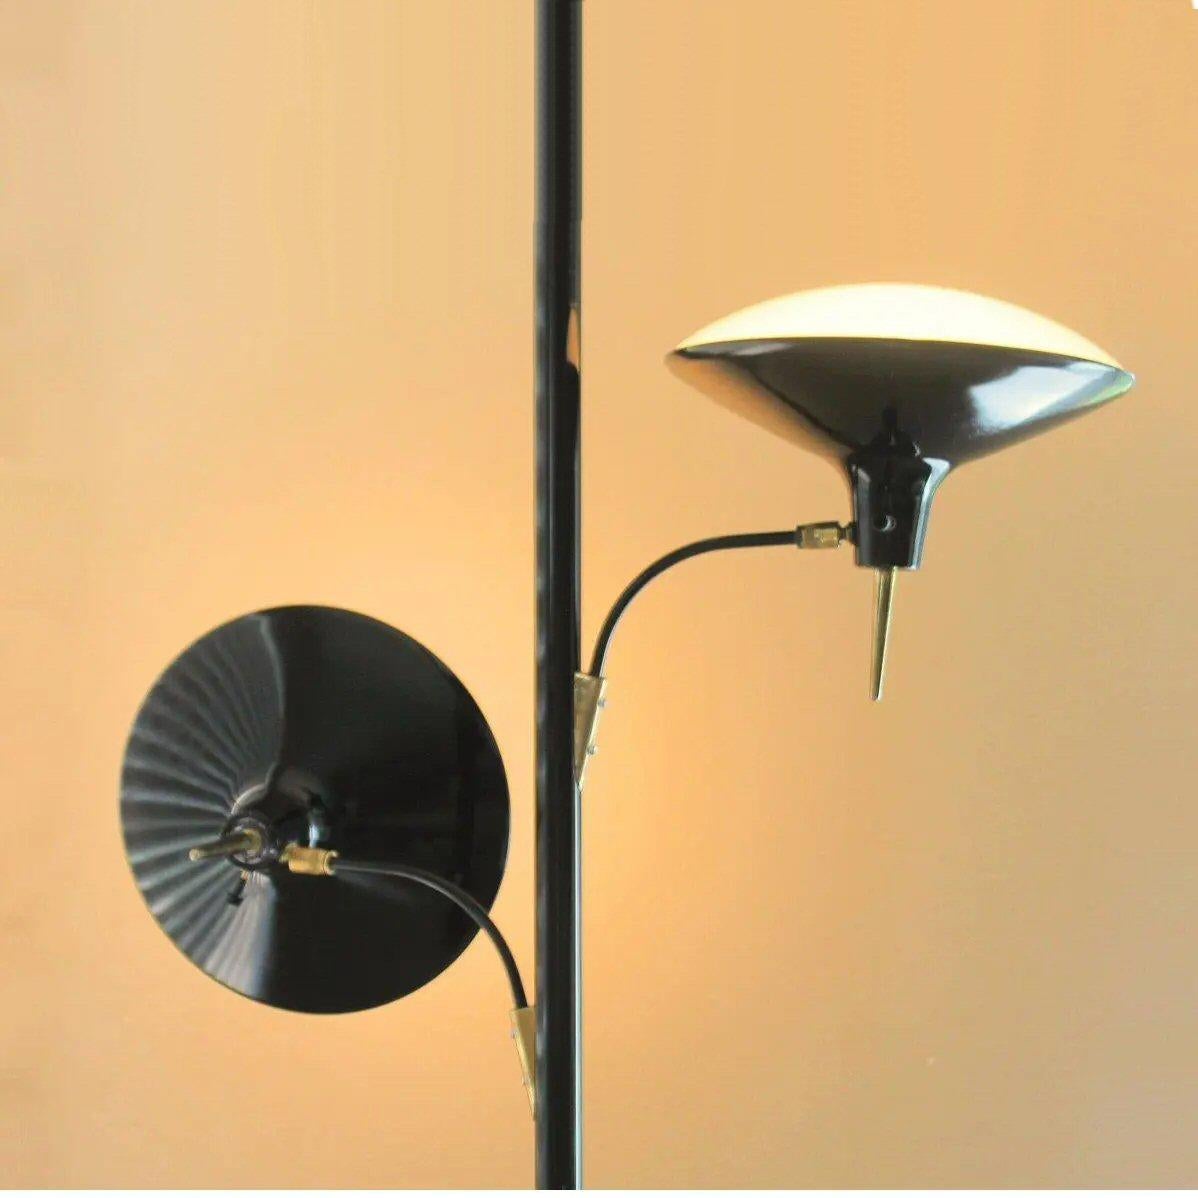 This MAGNIFICENT Mid Century Tension Pole Lamp is the legendary Laurel Saucer design!

The saucer design is iconic. Flying saucers were all the rage in the fifties and sixties.  This design gave people their own 'flying saucer' lamp!  

It cuts a